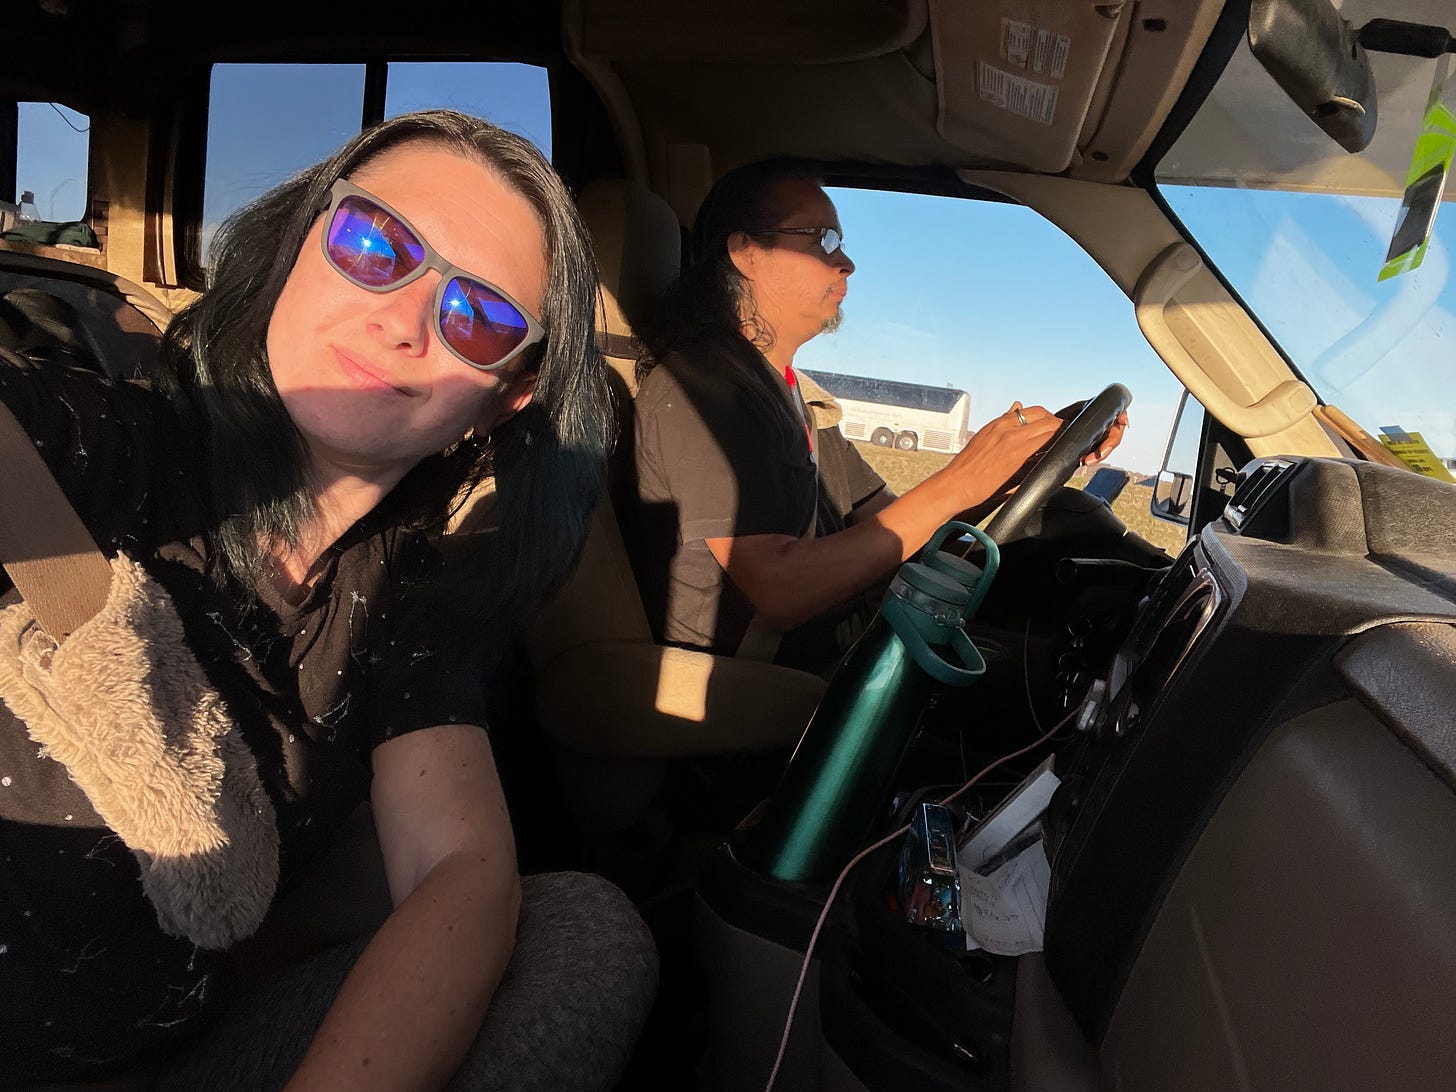 David driving the RV and Lyric in the passanger side. The sun leaves harsh shadows on both of them and Lyric is wearing sunglasses.